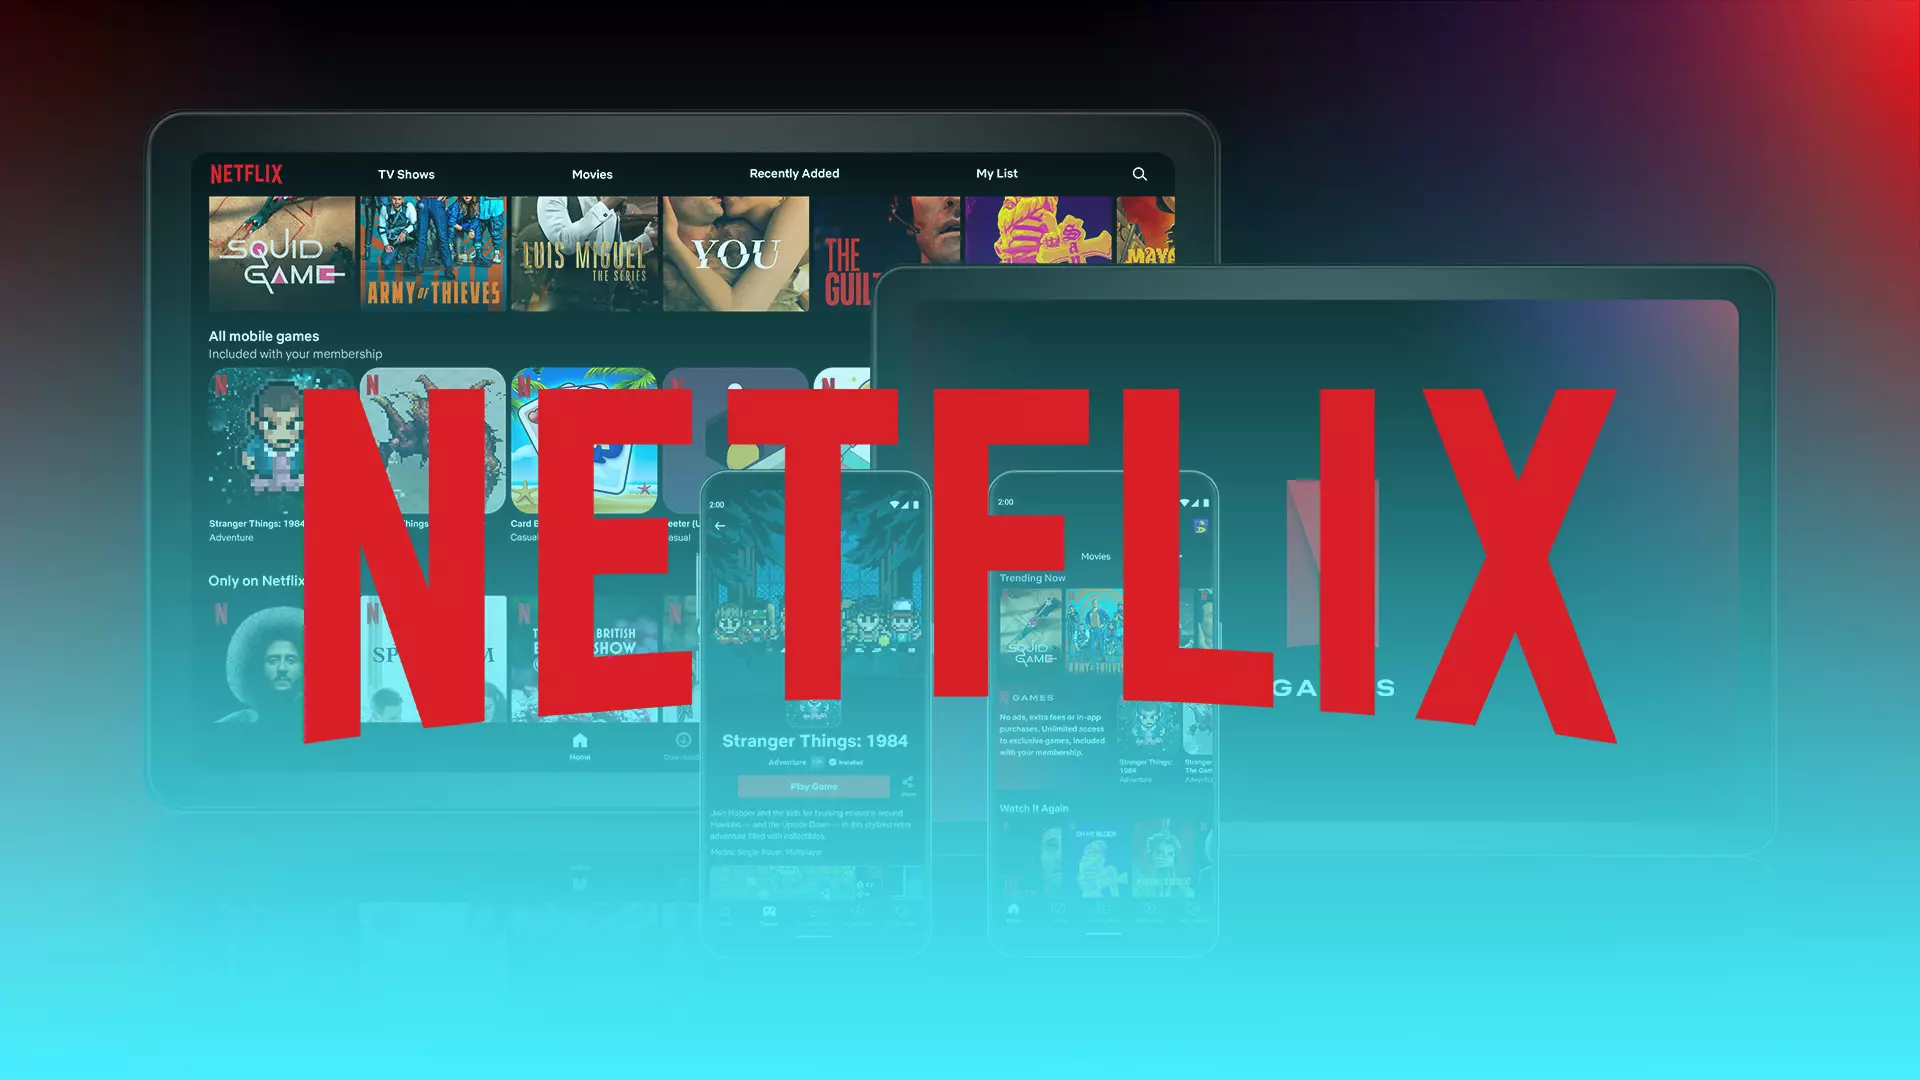 What games can you play for free with a Netflix subscription